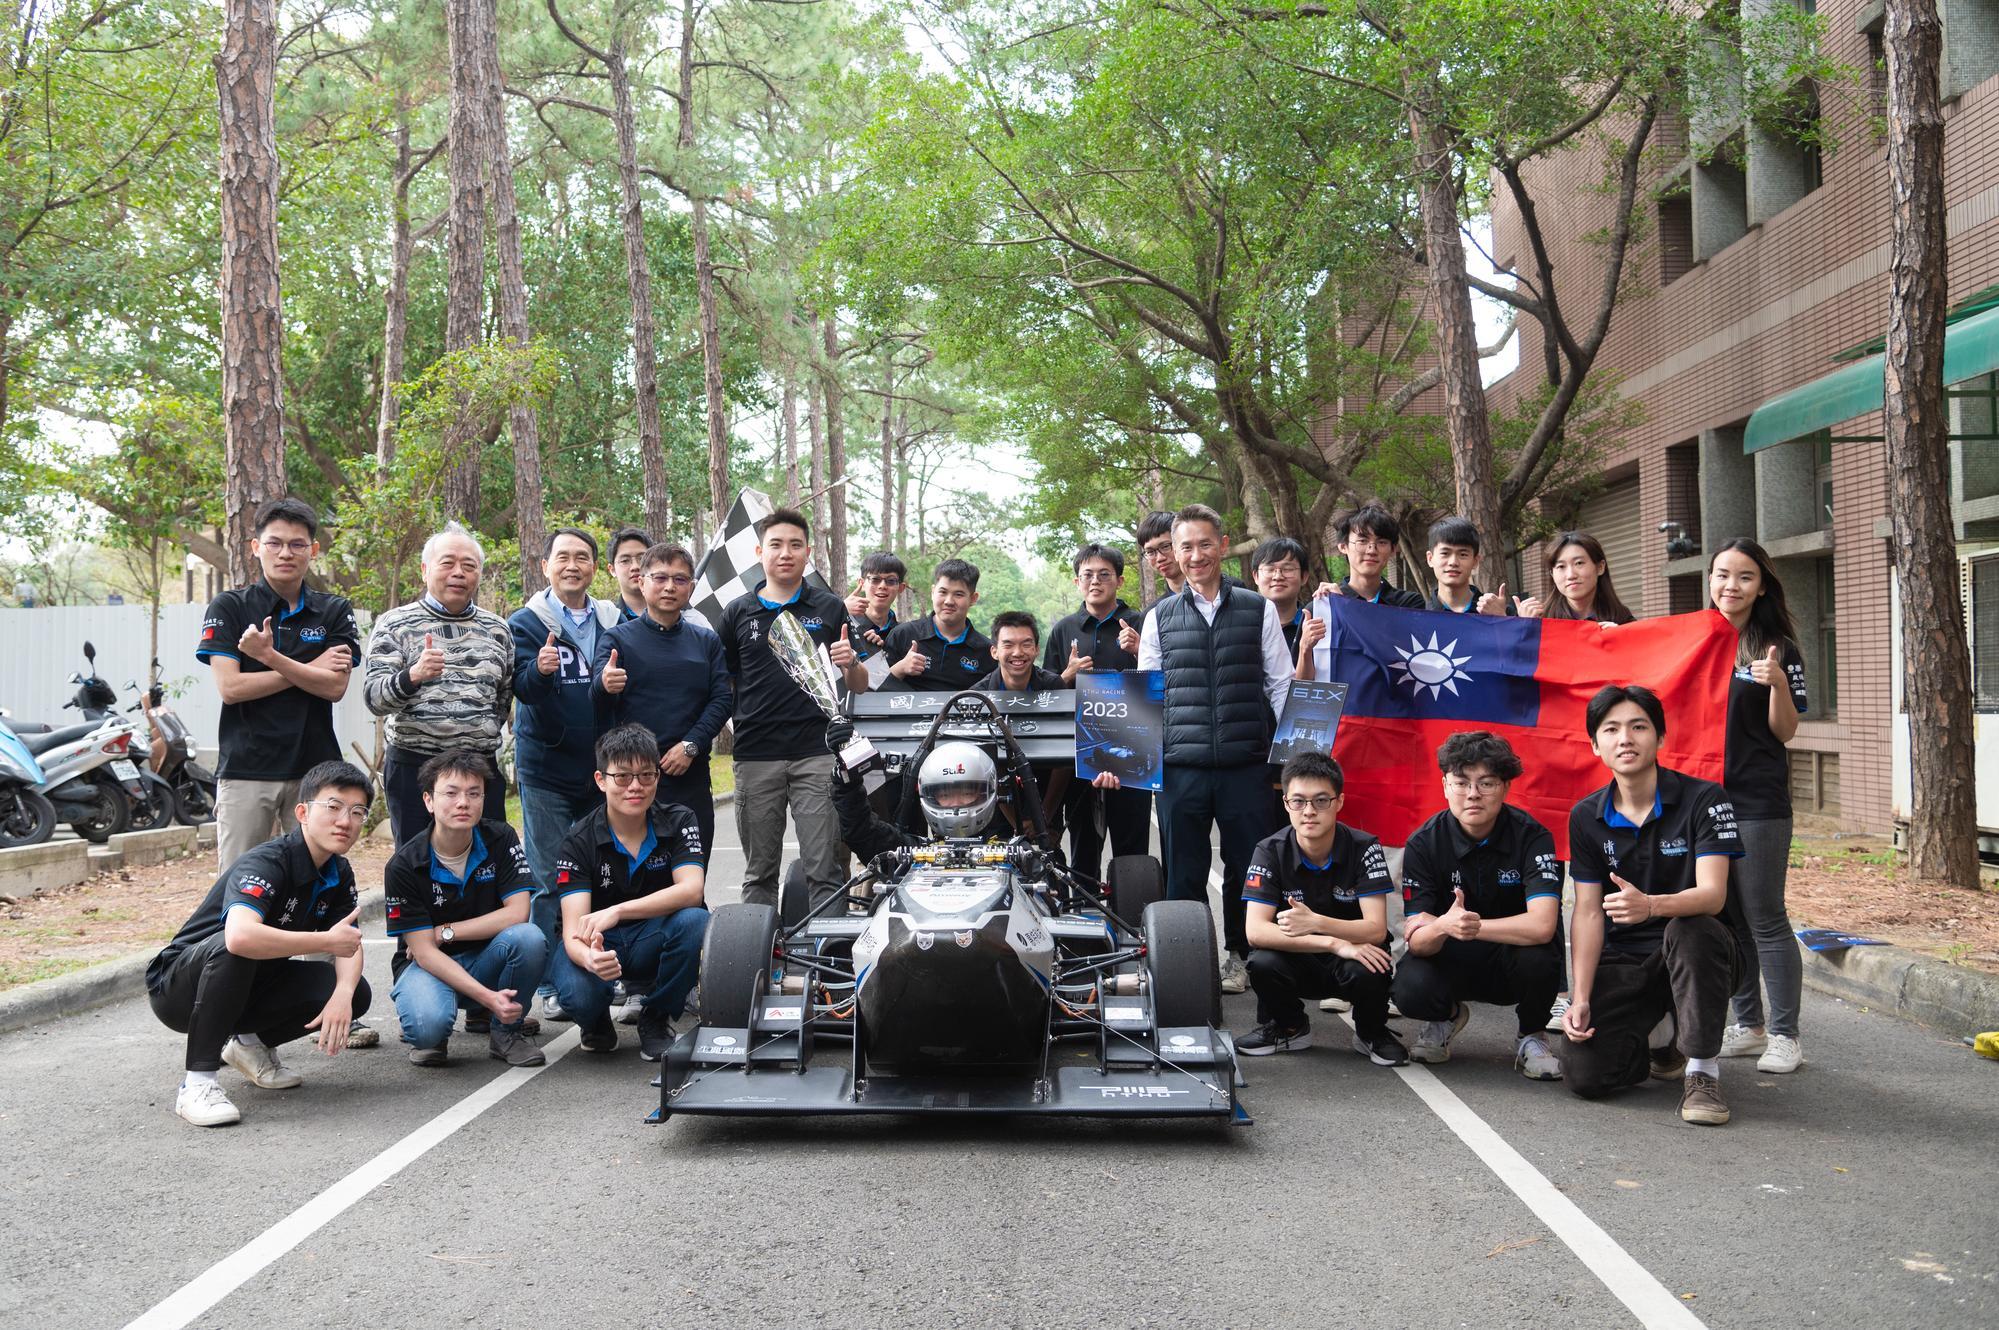 Student teams competing in international competitions are now able to receive academic credit, including NTHU Racing Team.